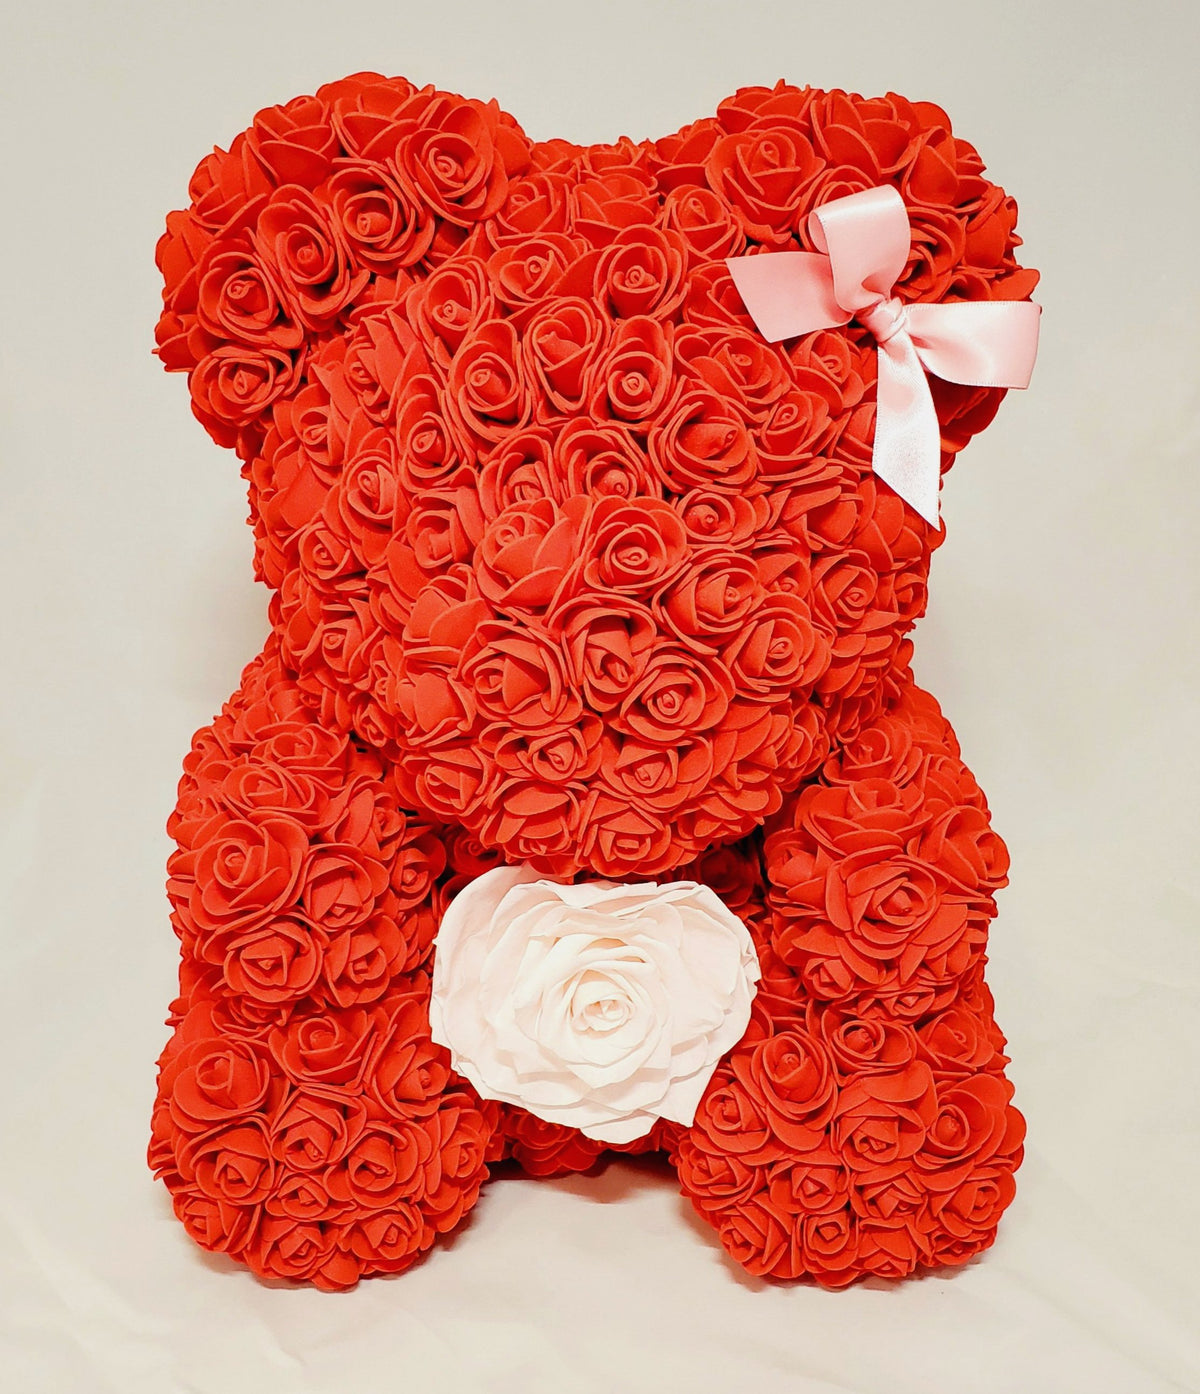 Rose Teddy Bear with Preserved Large Rose -14 inch tall